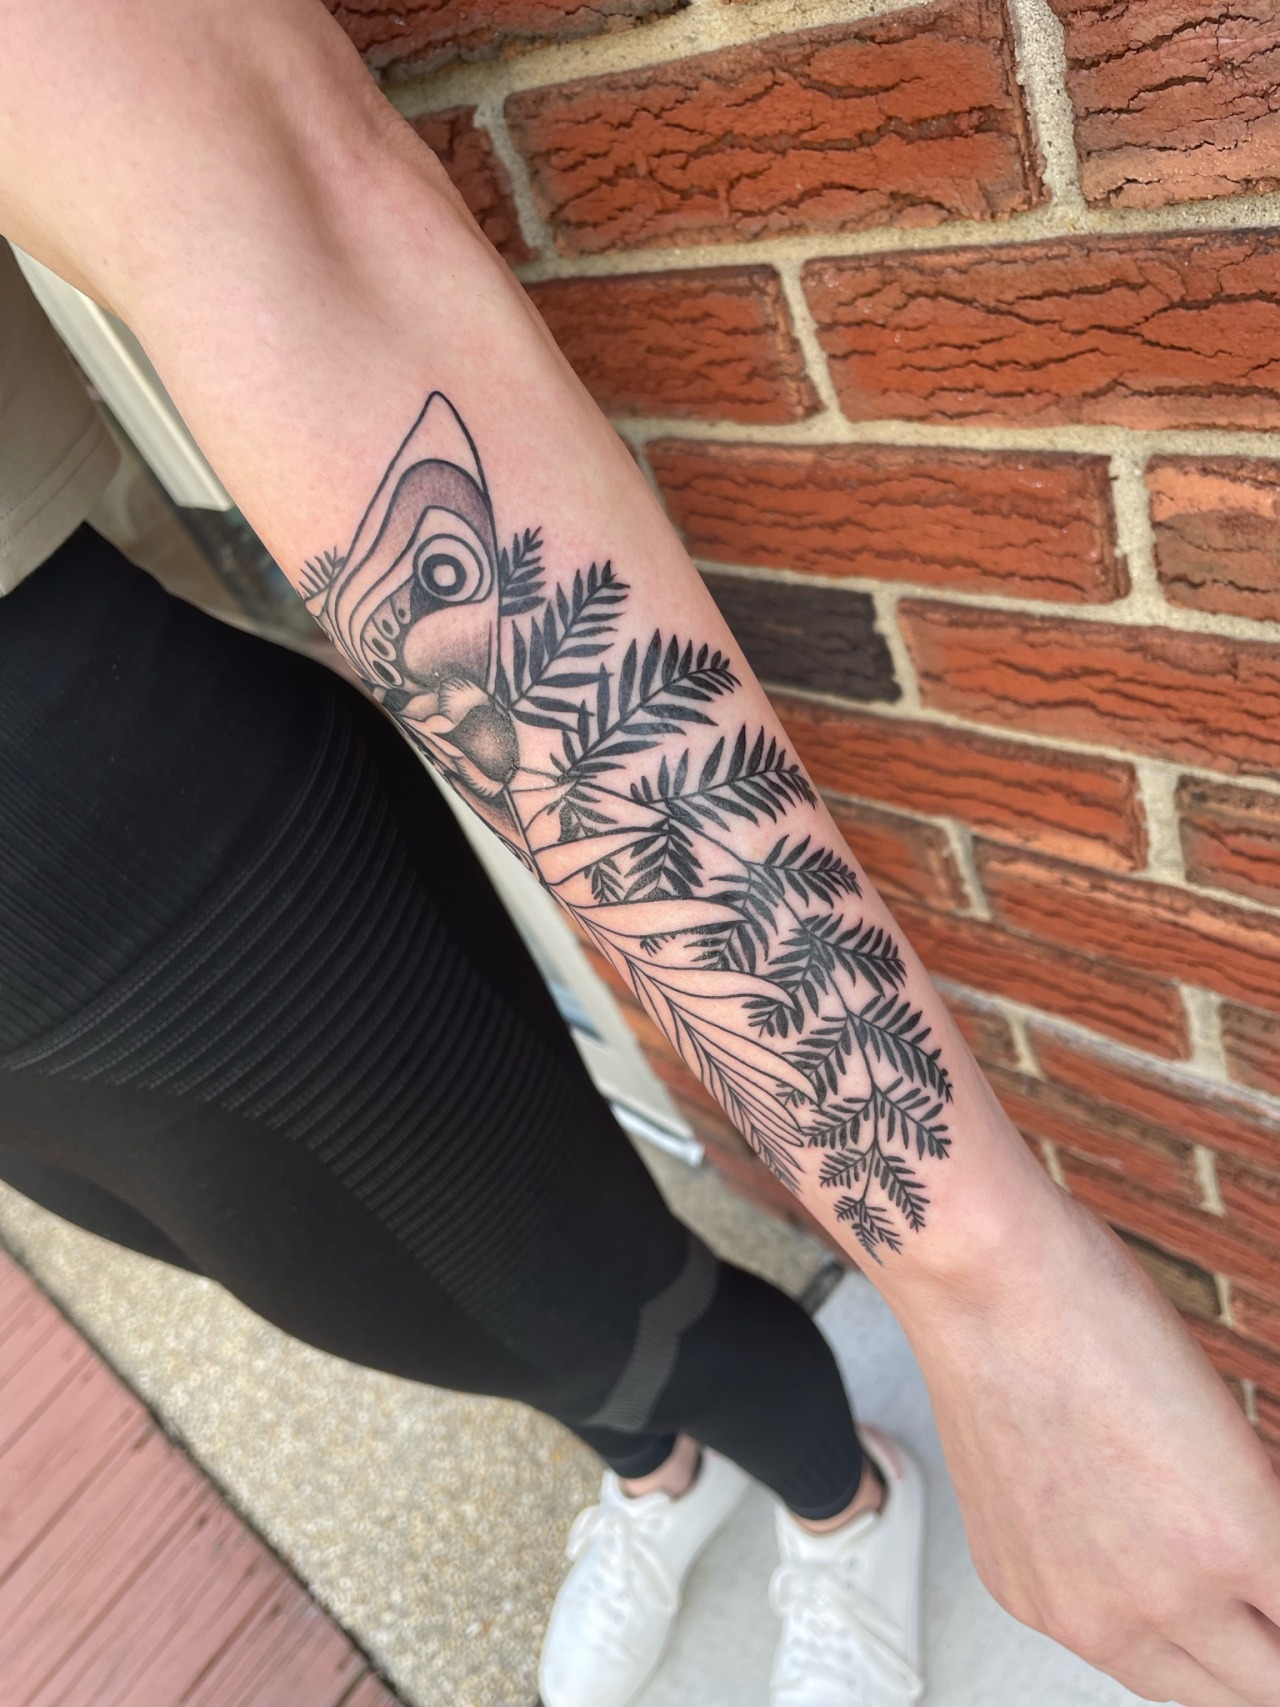 Naughty Dog on X: Ellie's tattoo IRL. Thanks to Alina for sharing your The  Last of Us Part II-inspired tattoo! Share your own fan art, cosplay, and  more here:   /